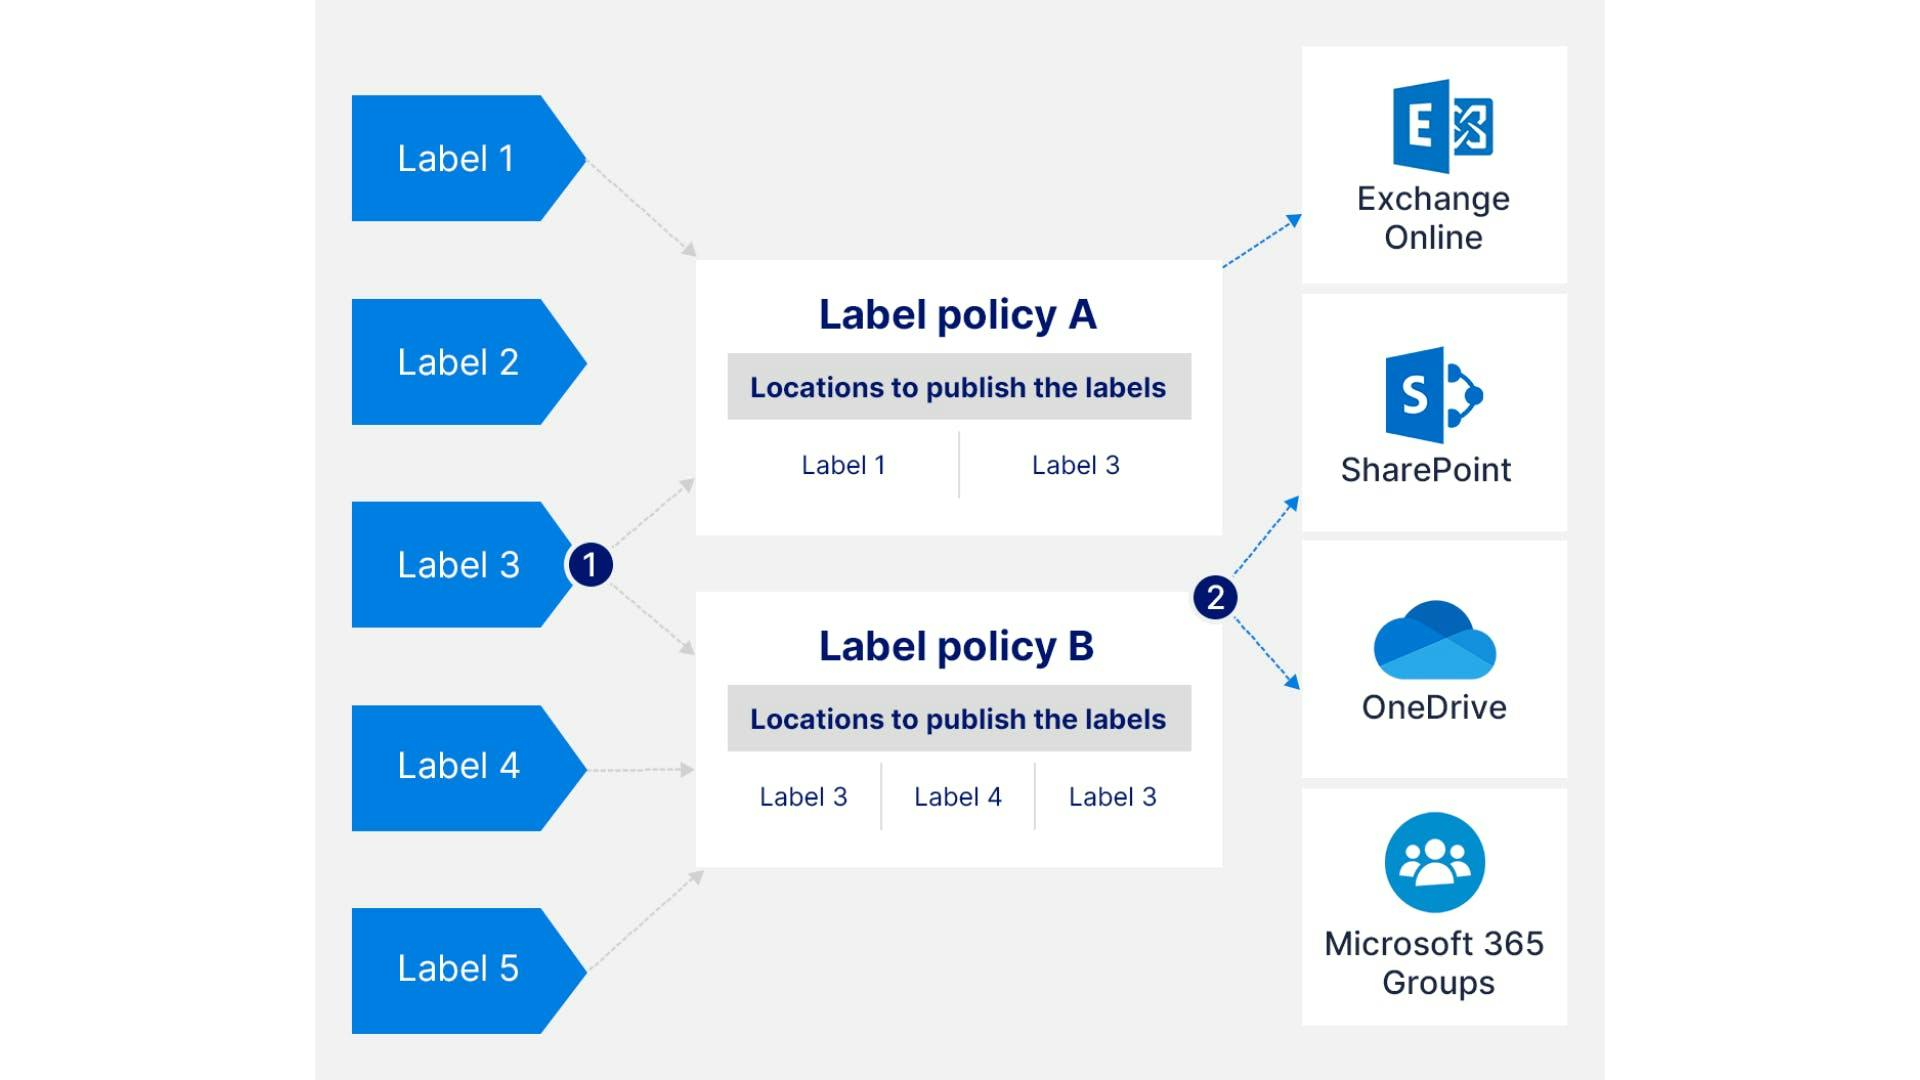 retention labels, labels policies, and publish locations